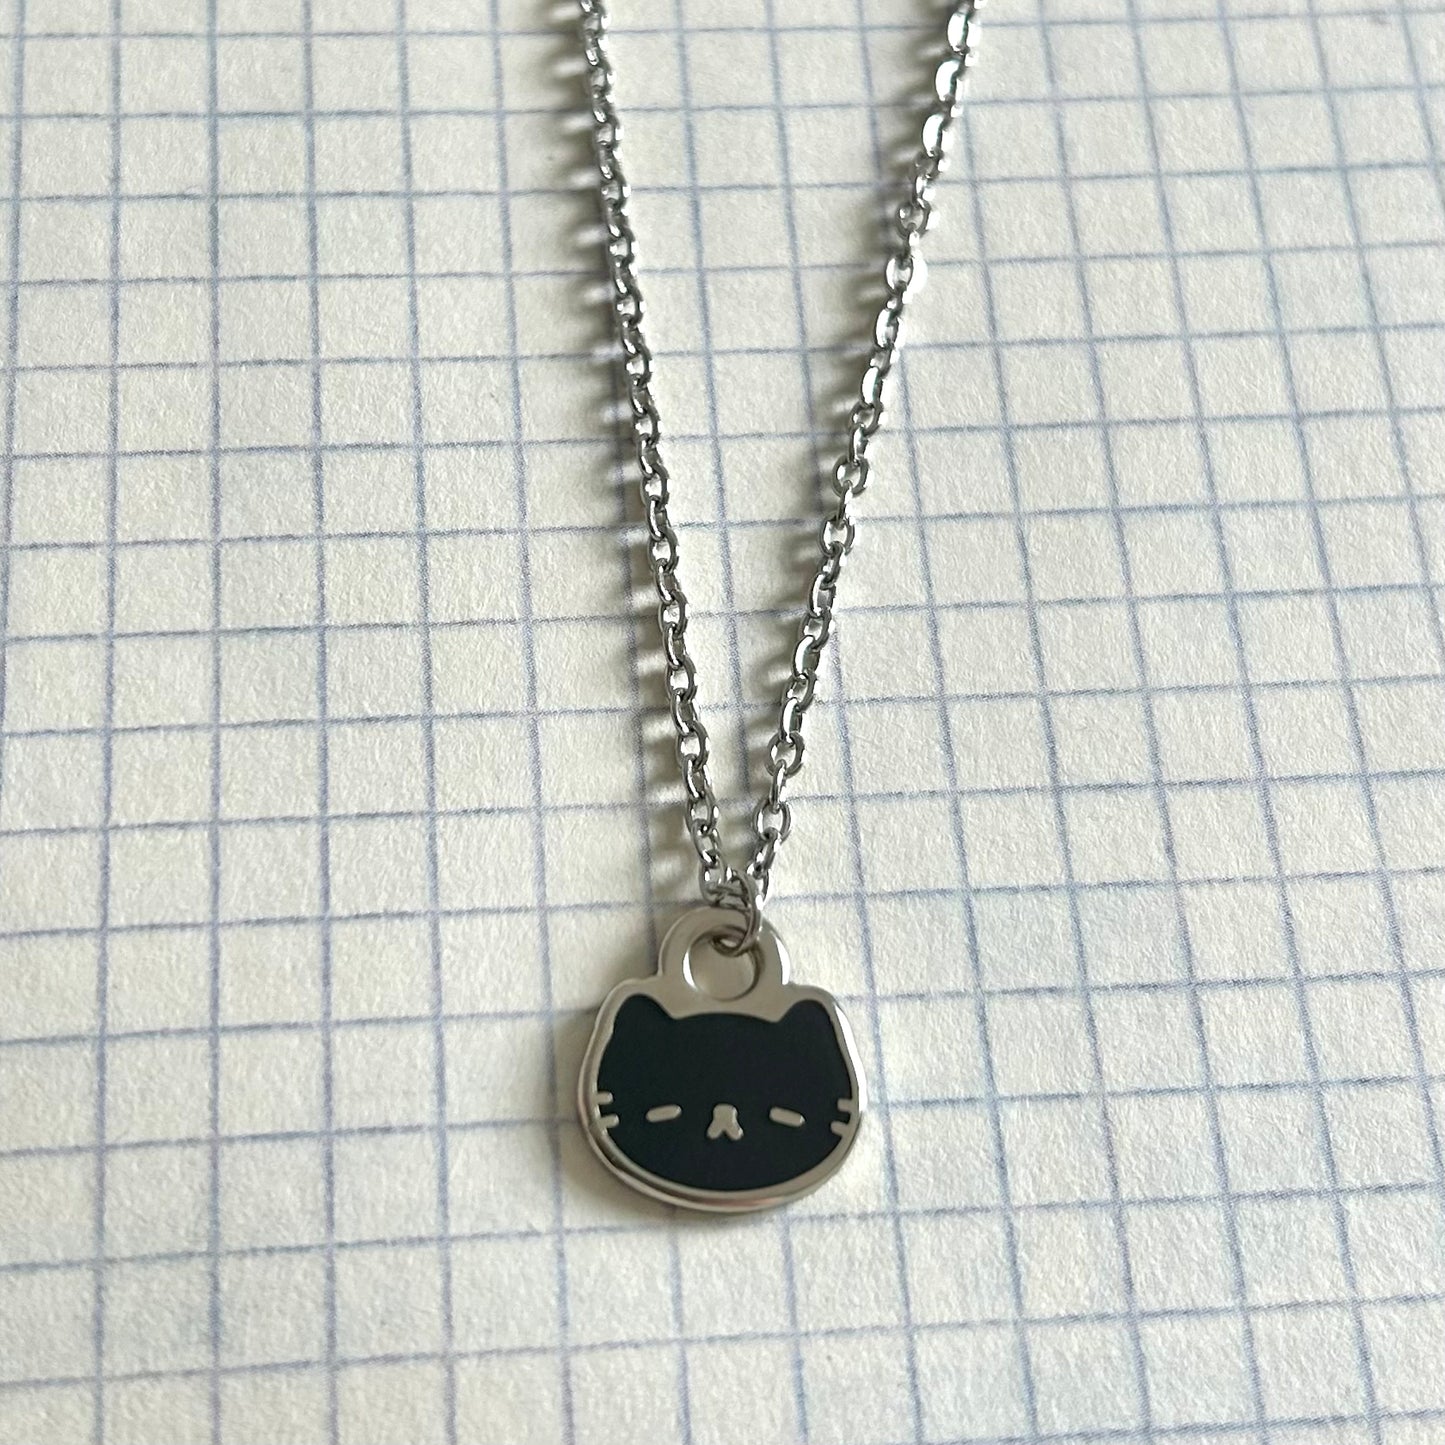 Kitty Necklace ✧･ﾟ: *